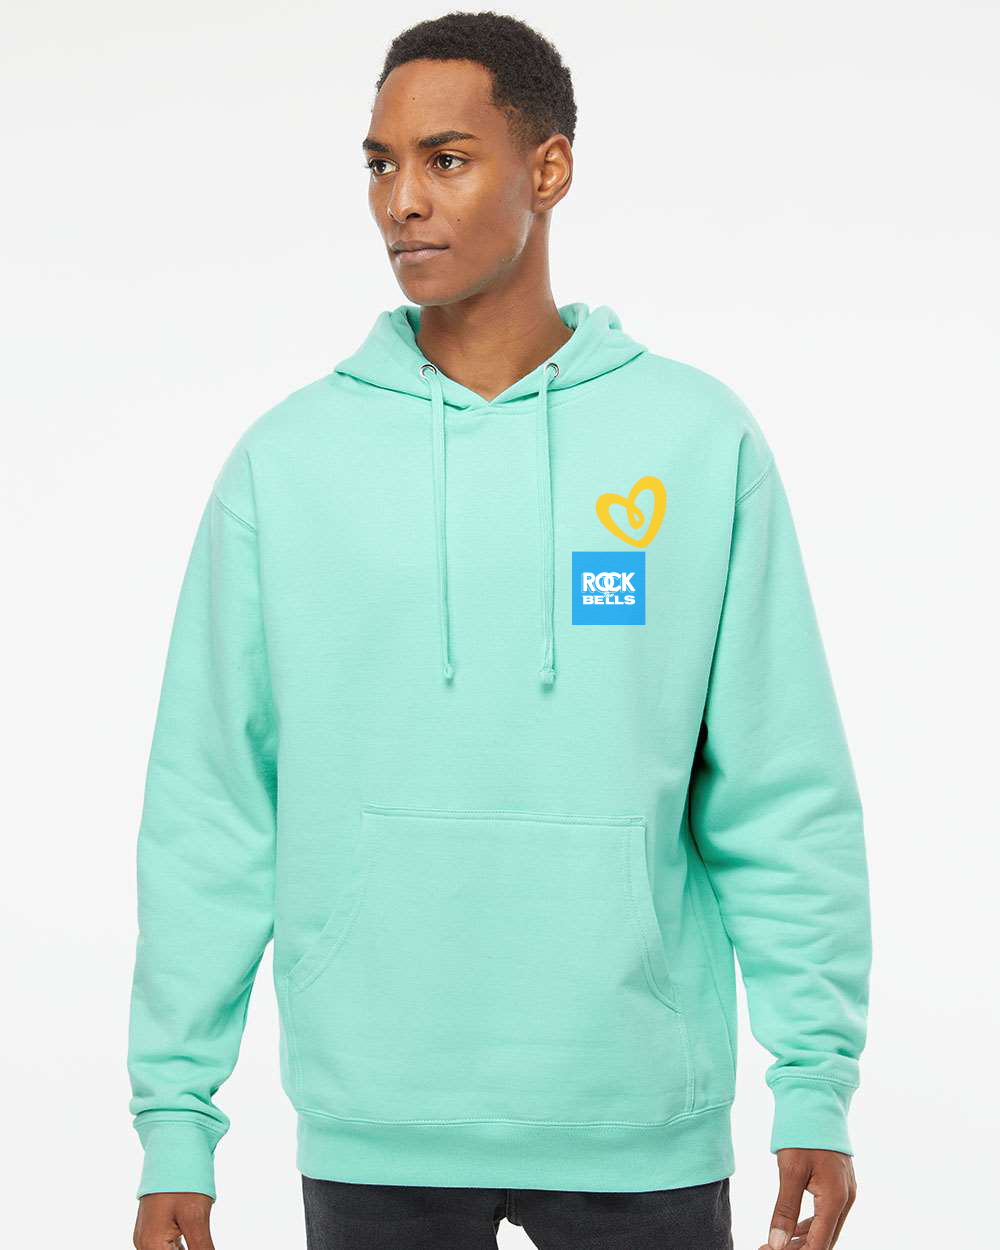 Limited Edition Maternal Health Equity Hoodie